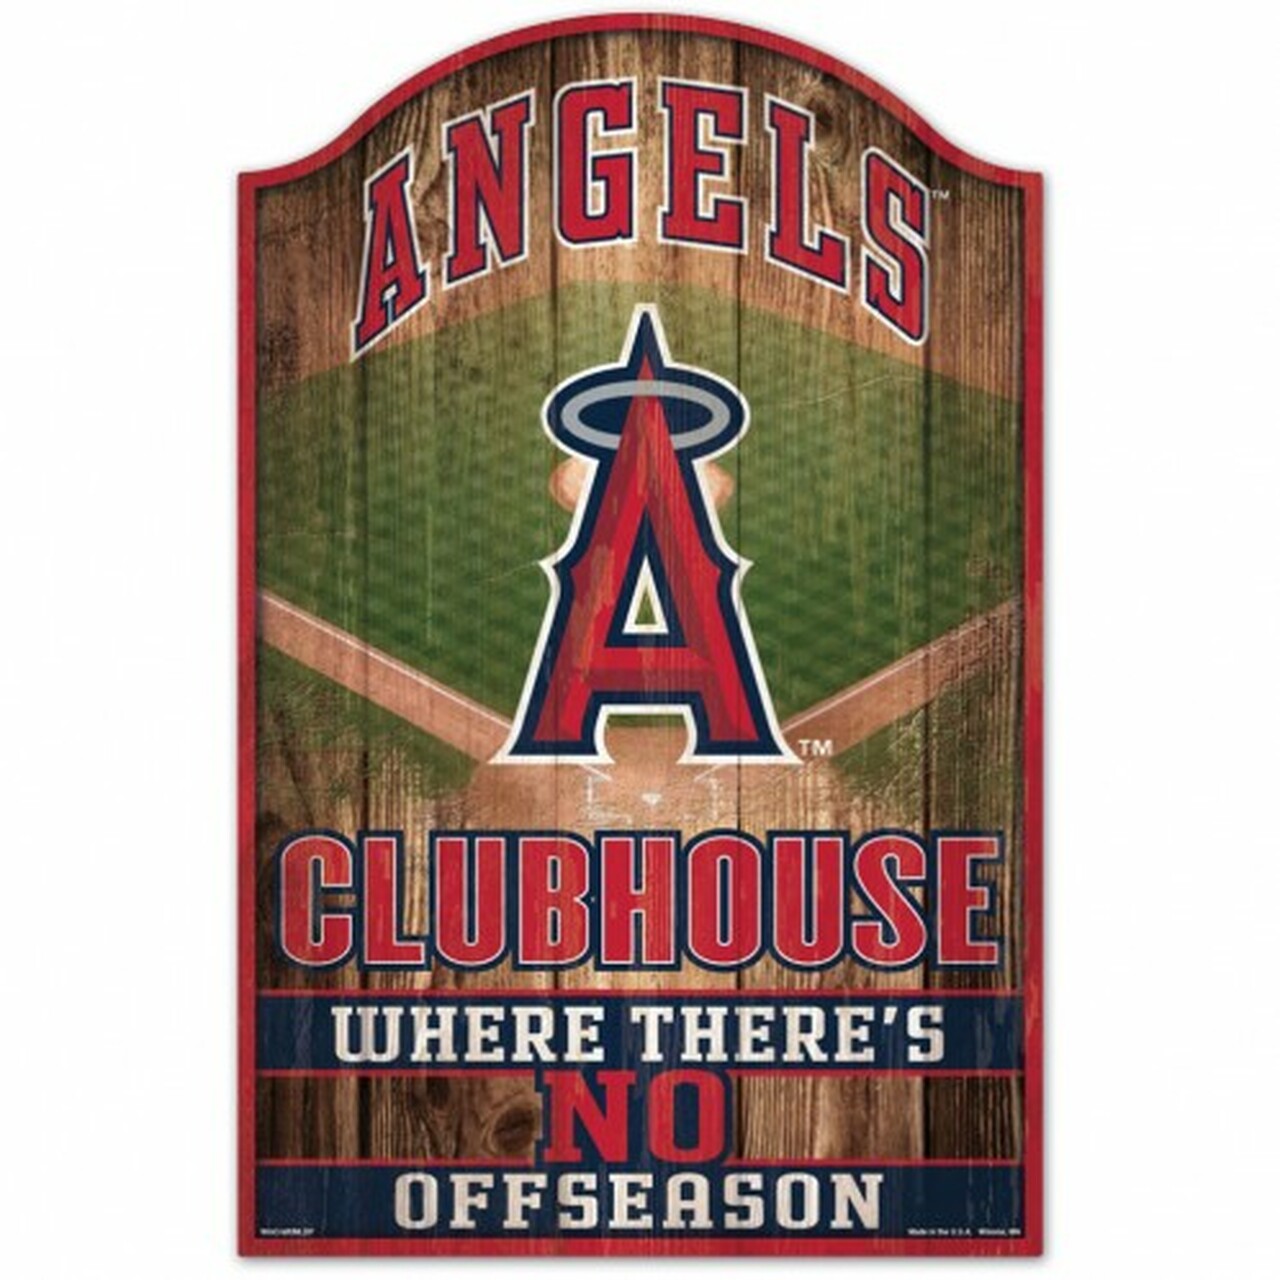 Los Angeles Angels 11" x 17" Fan Cave Wood Sign by Wincraft